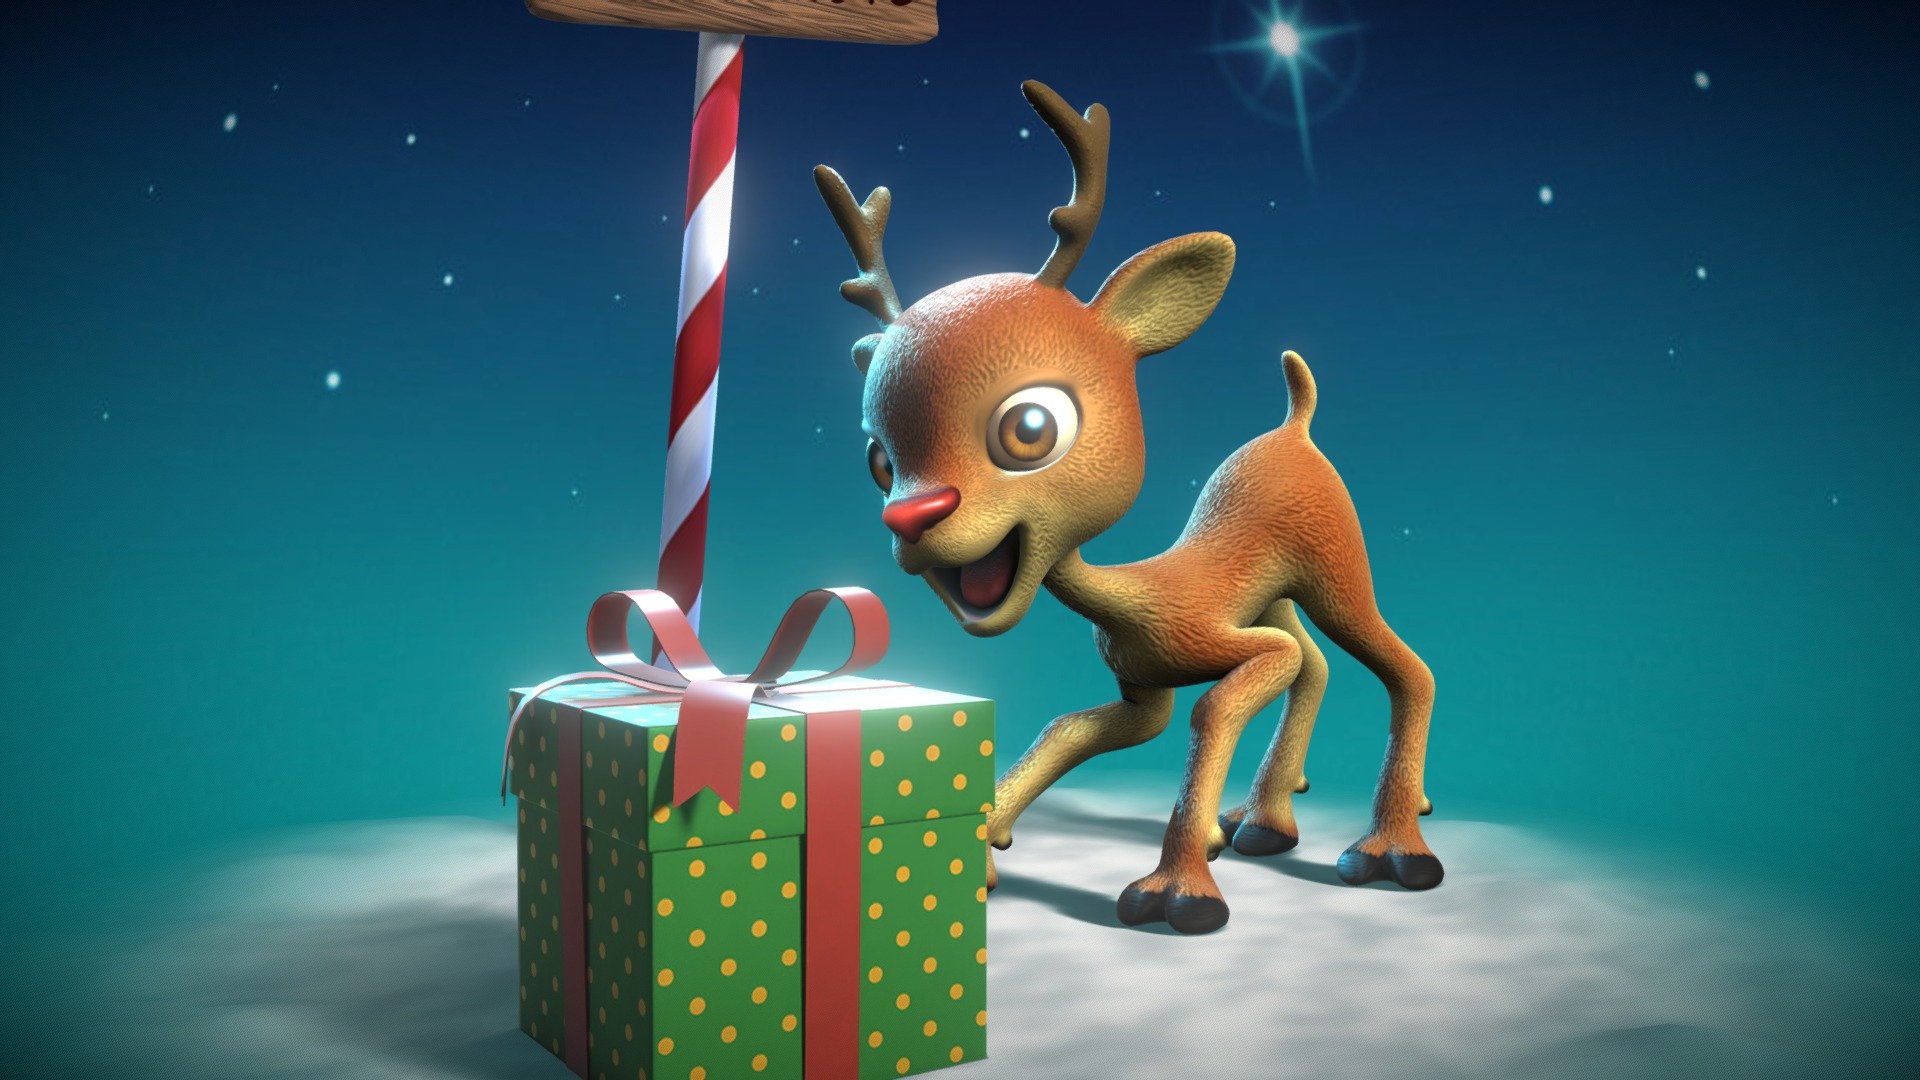 Available at my Blender Market shop. 

Rudolph the Red Nosed Reindeer re-imagined as a cute baby Christmas character. 

 - Baby Rudolph the Red Nosed Reindeer - 3D model by DinoReplicas 3d model